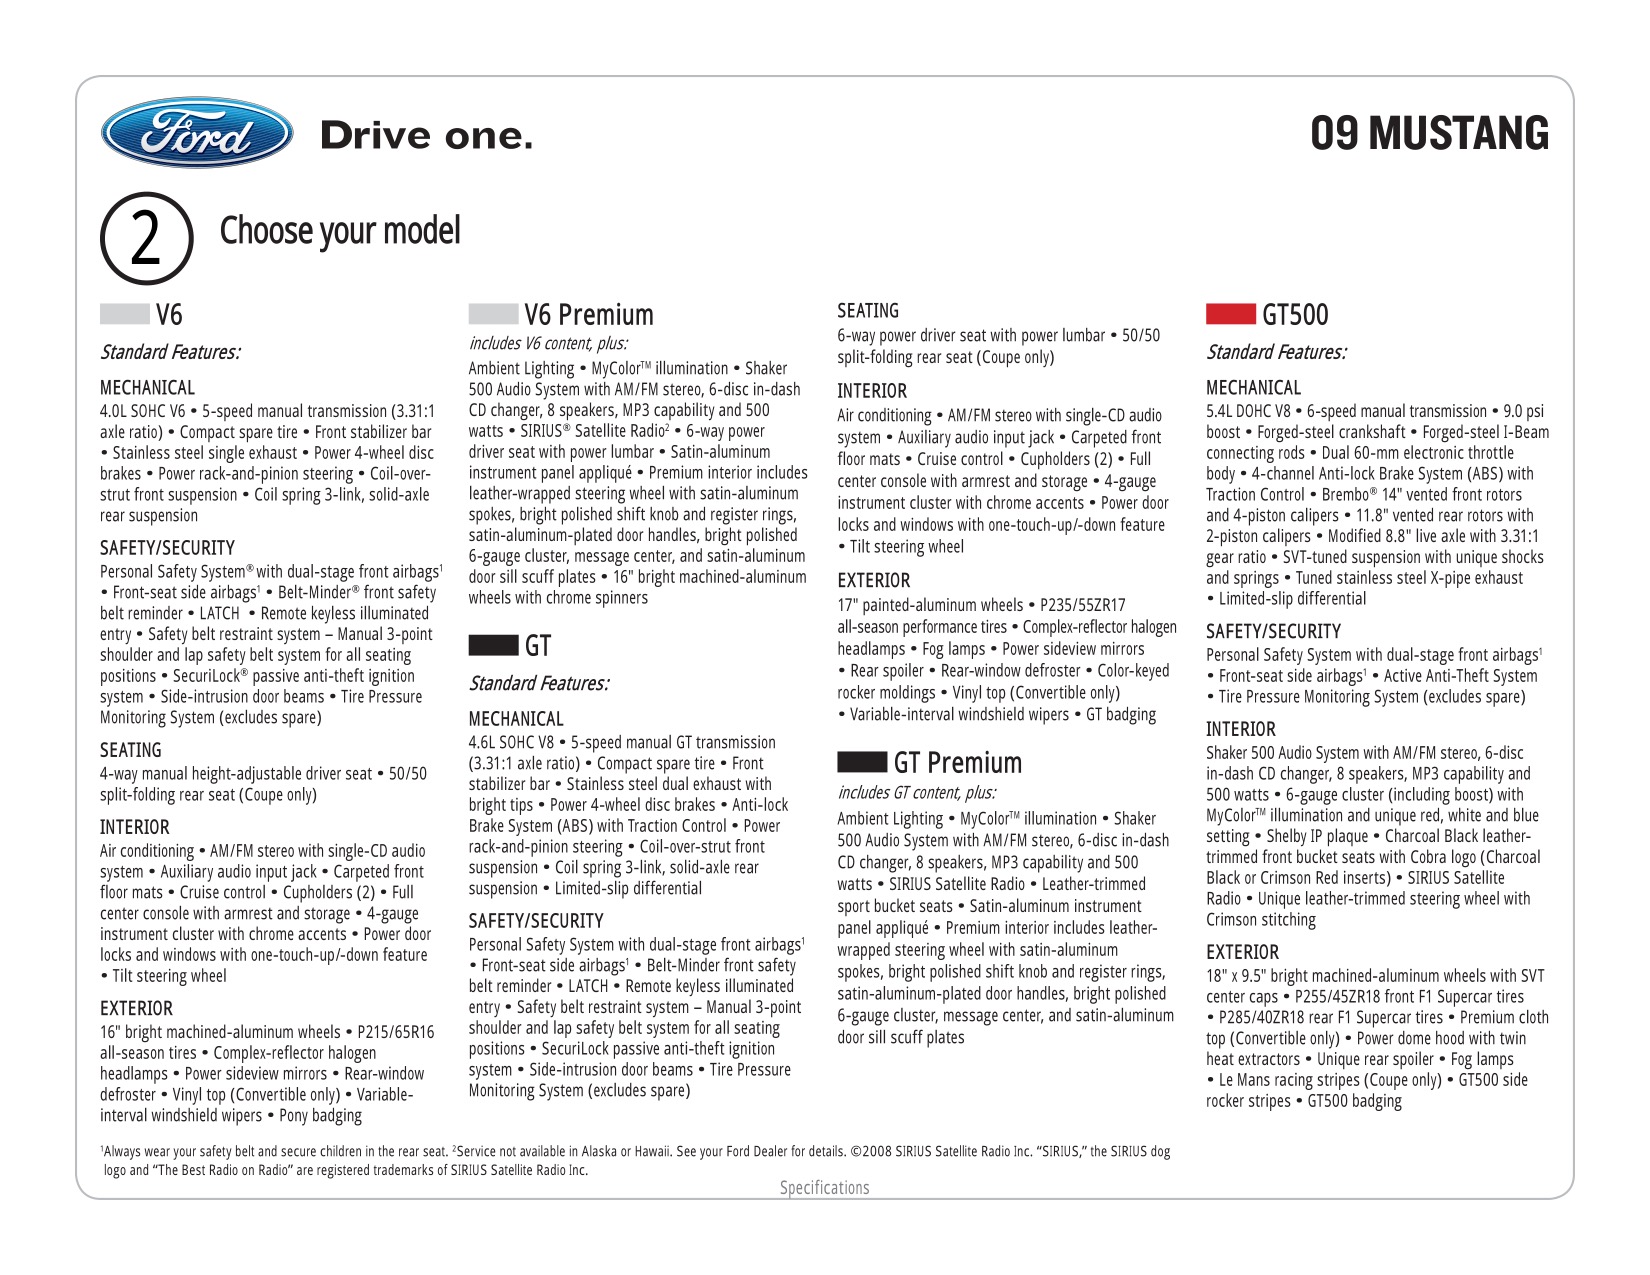 2009 Ford Mustang Brochure Page 2